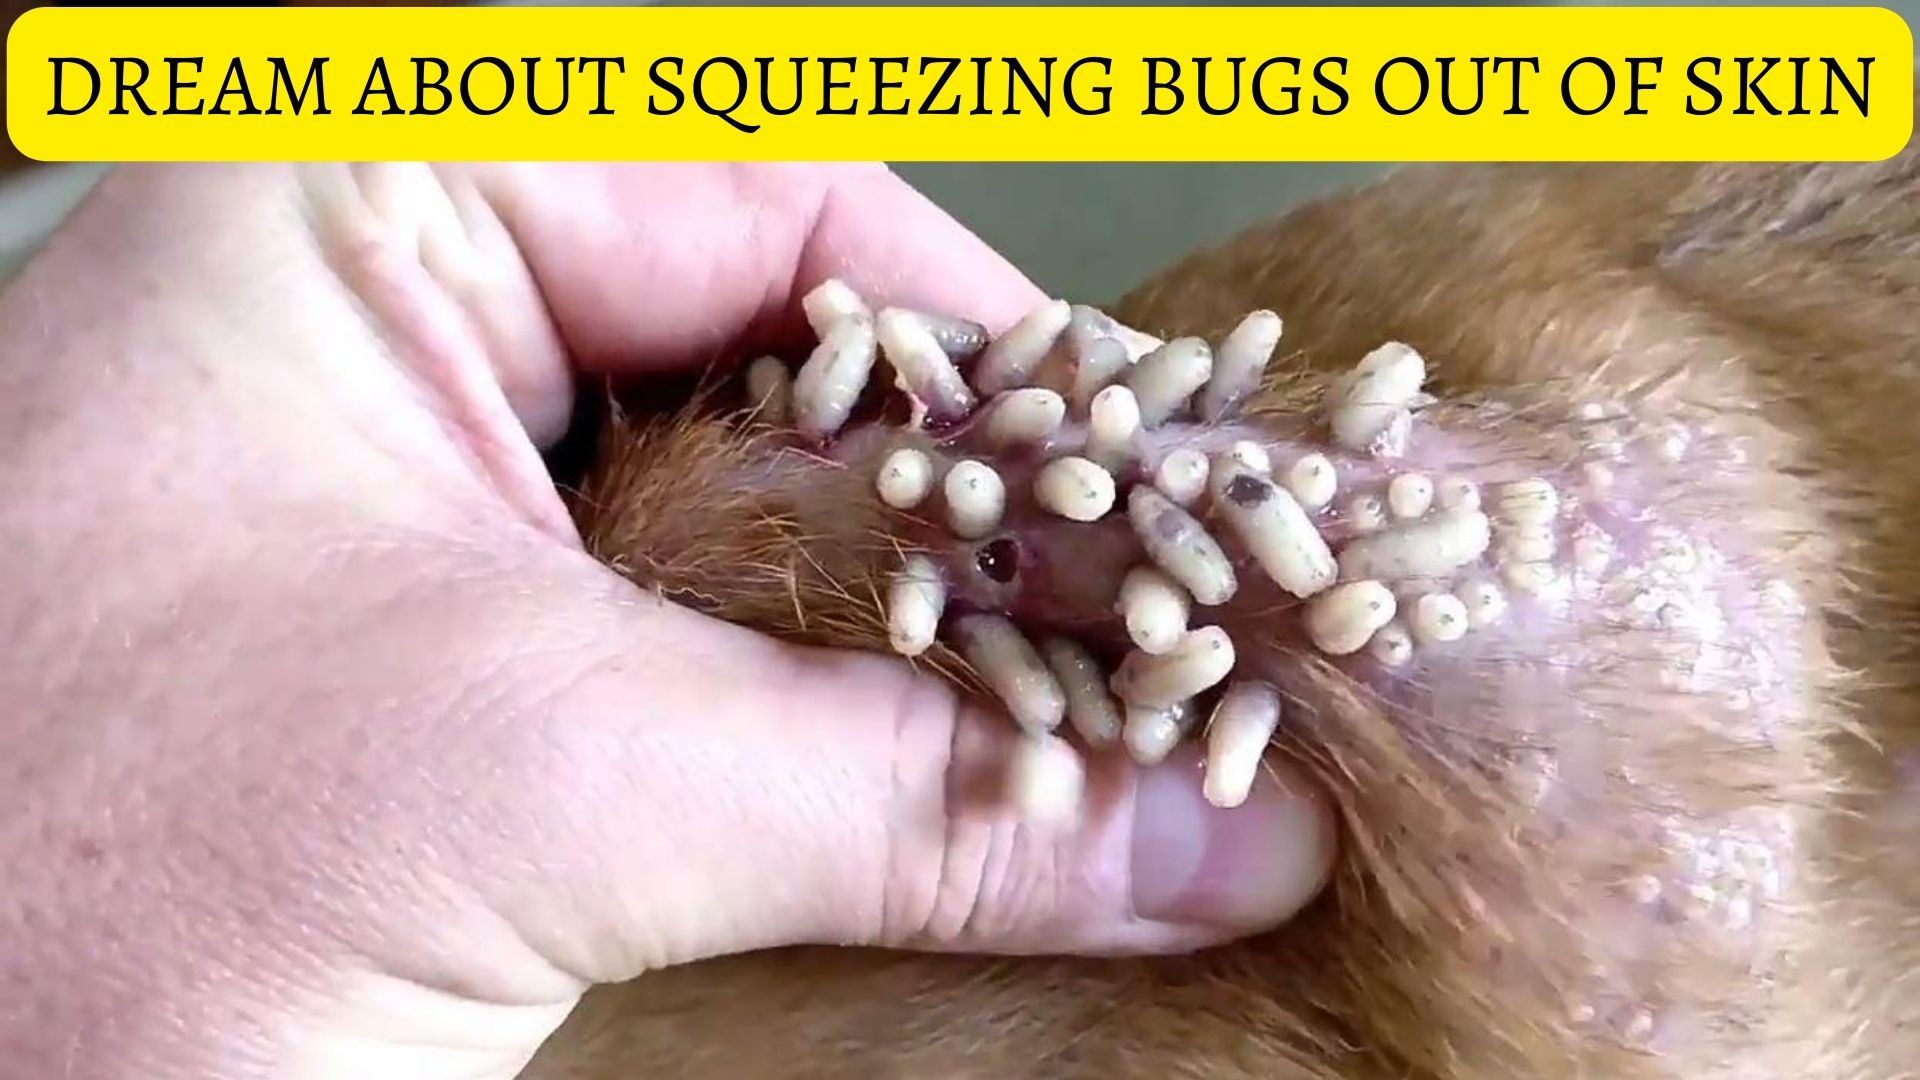 Dream About Squeezing Bugs Out Of Skin - Denotes Vitality, Strength, And Energy